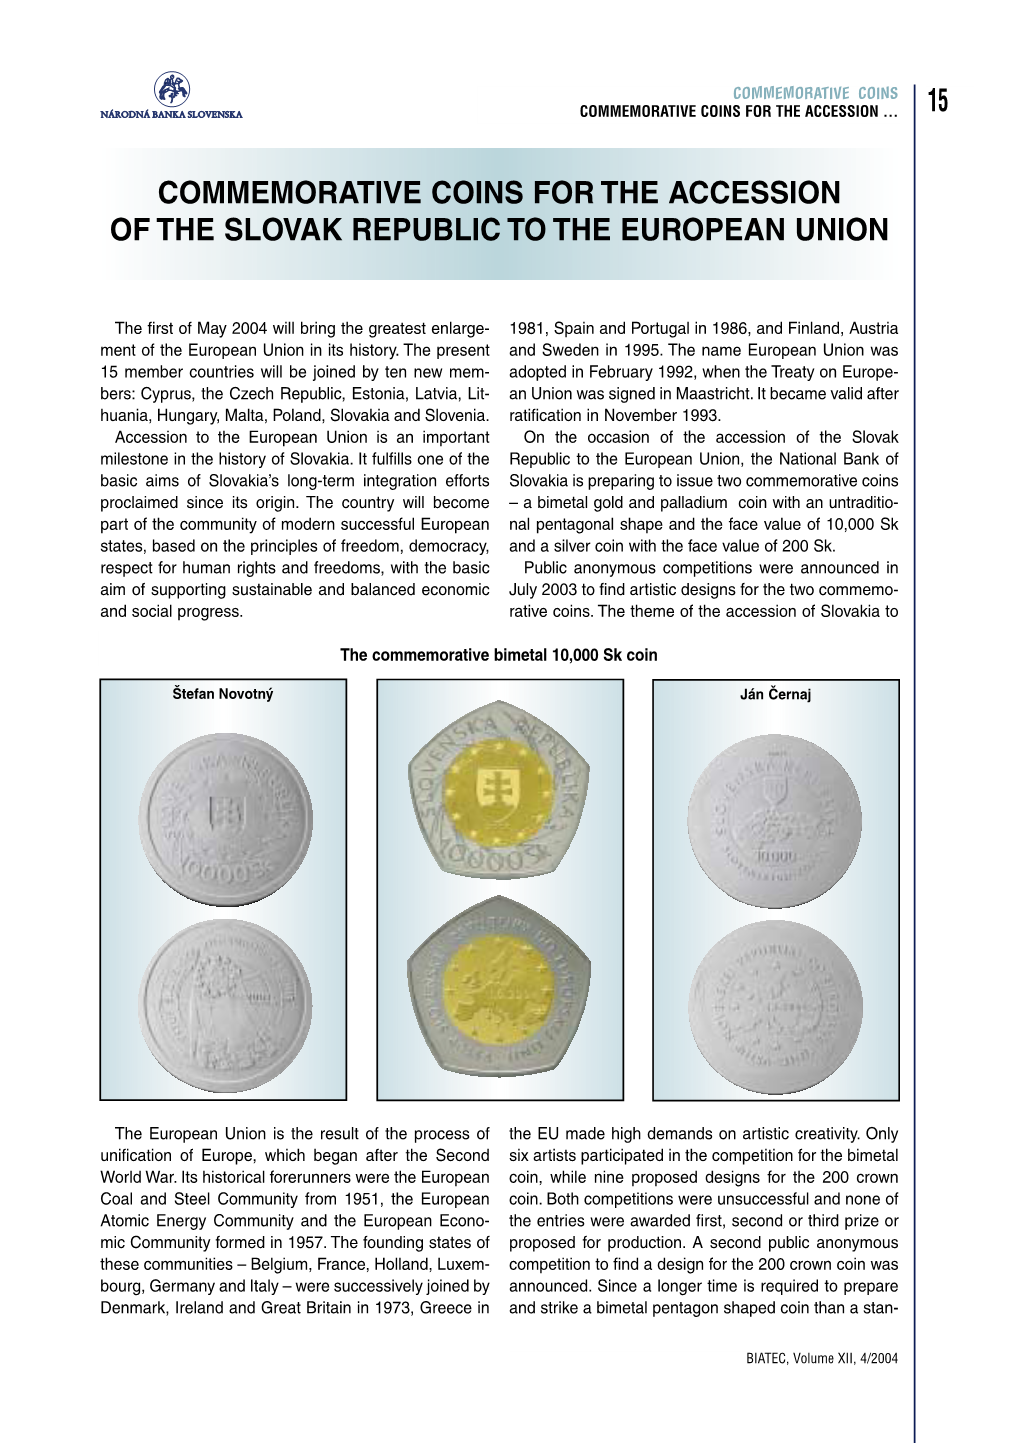 15 Commemorative Coins for the Accession of the Slovak